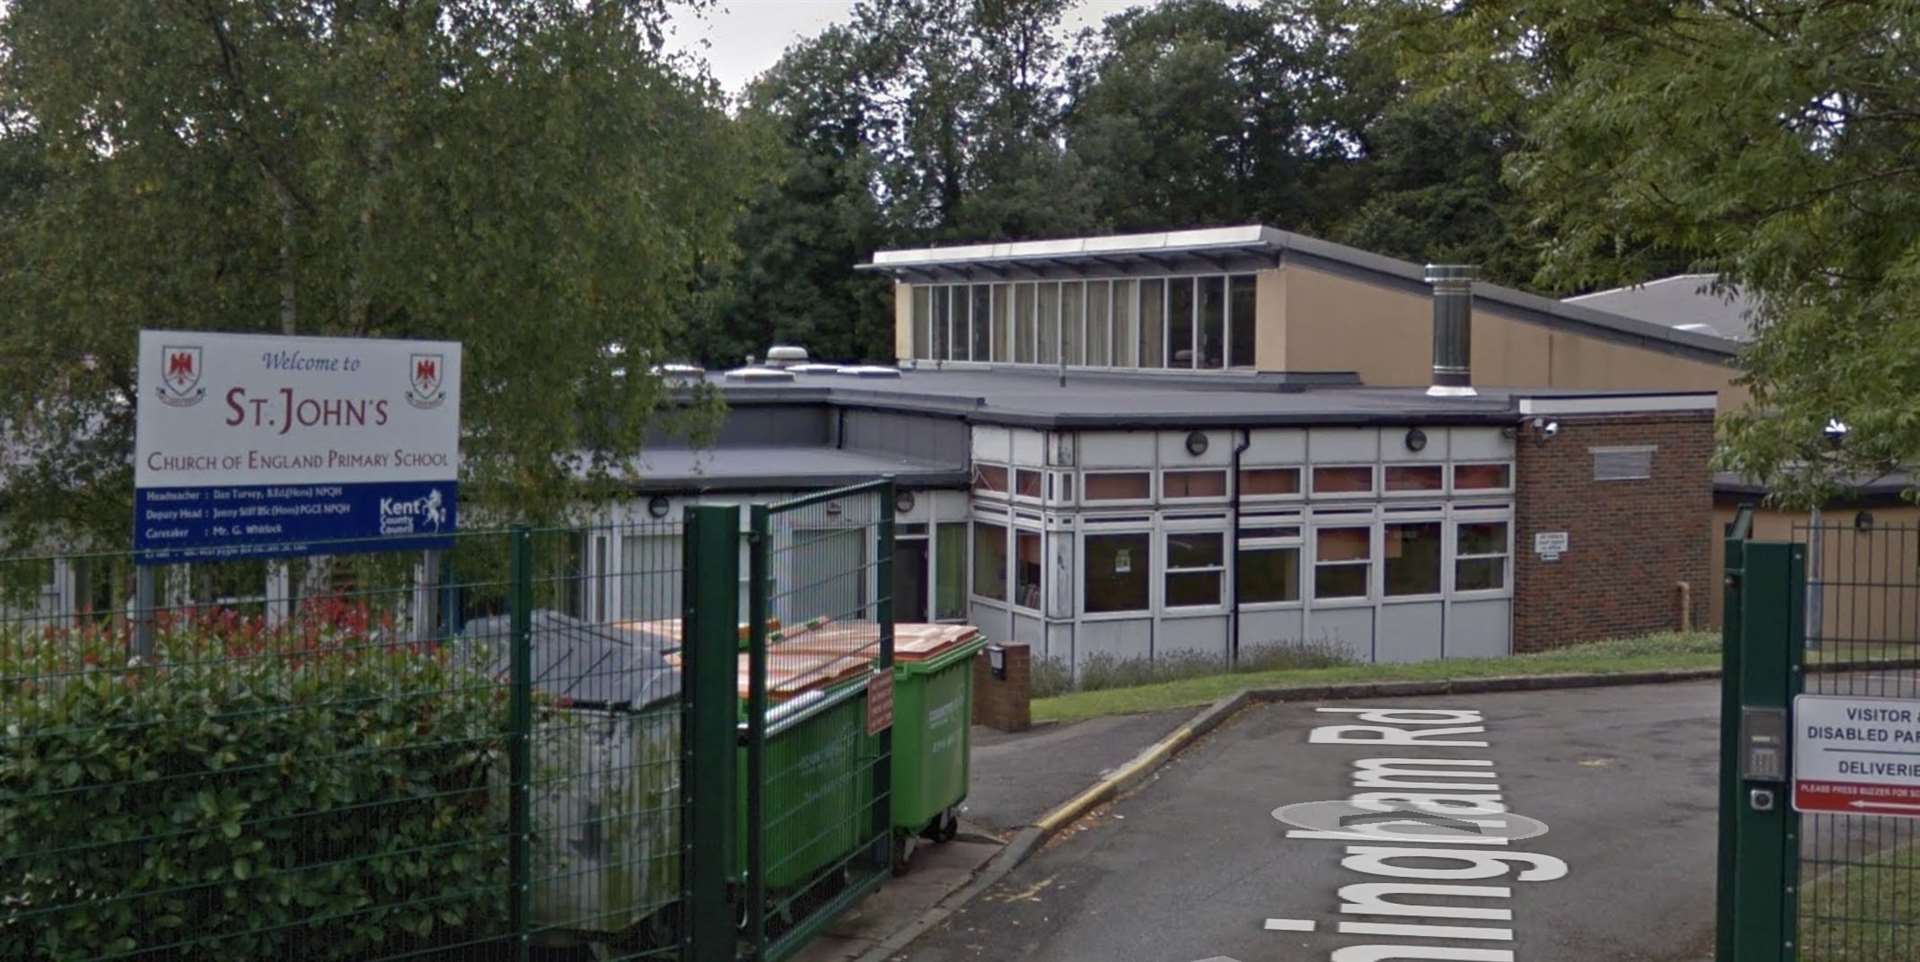 St John's Church of England Primary School, in Tunbridge Wells, has confirmed one of its students is in hospital after contracting Strep A. Picture: Google Maps